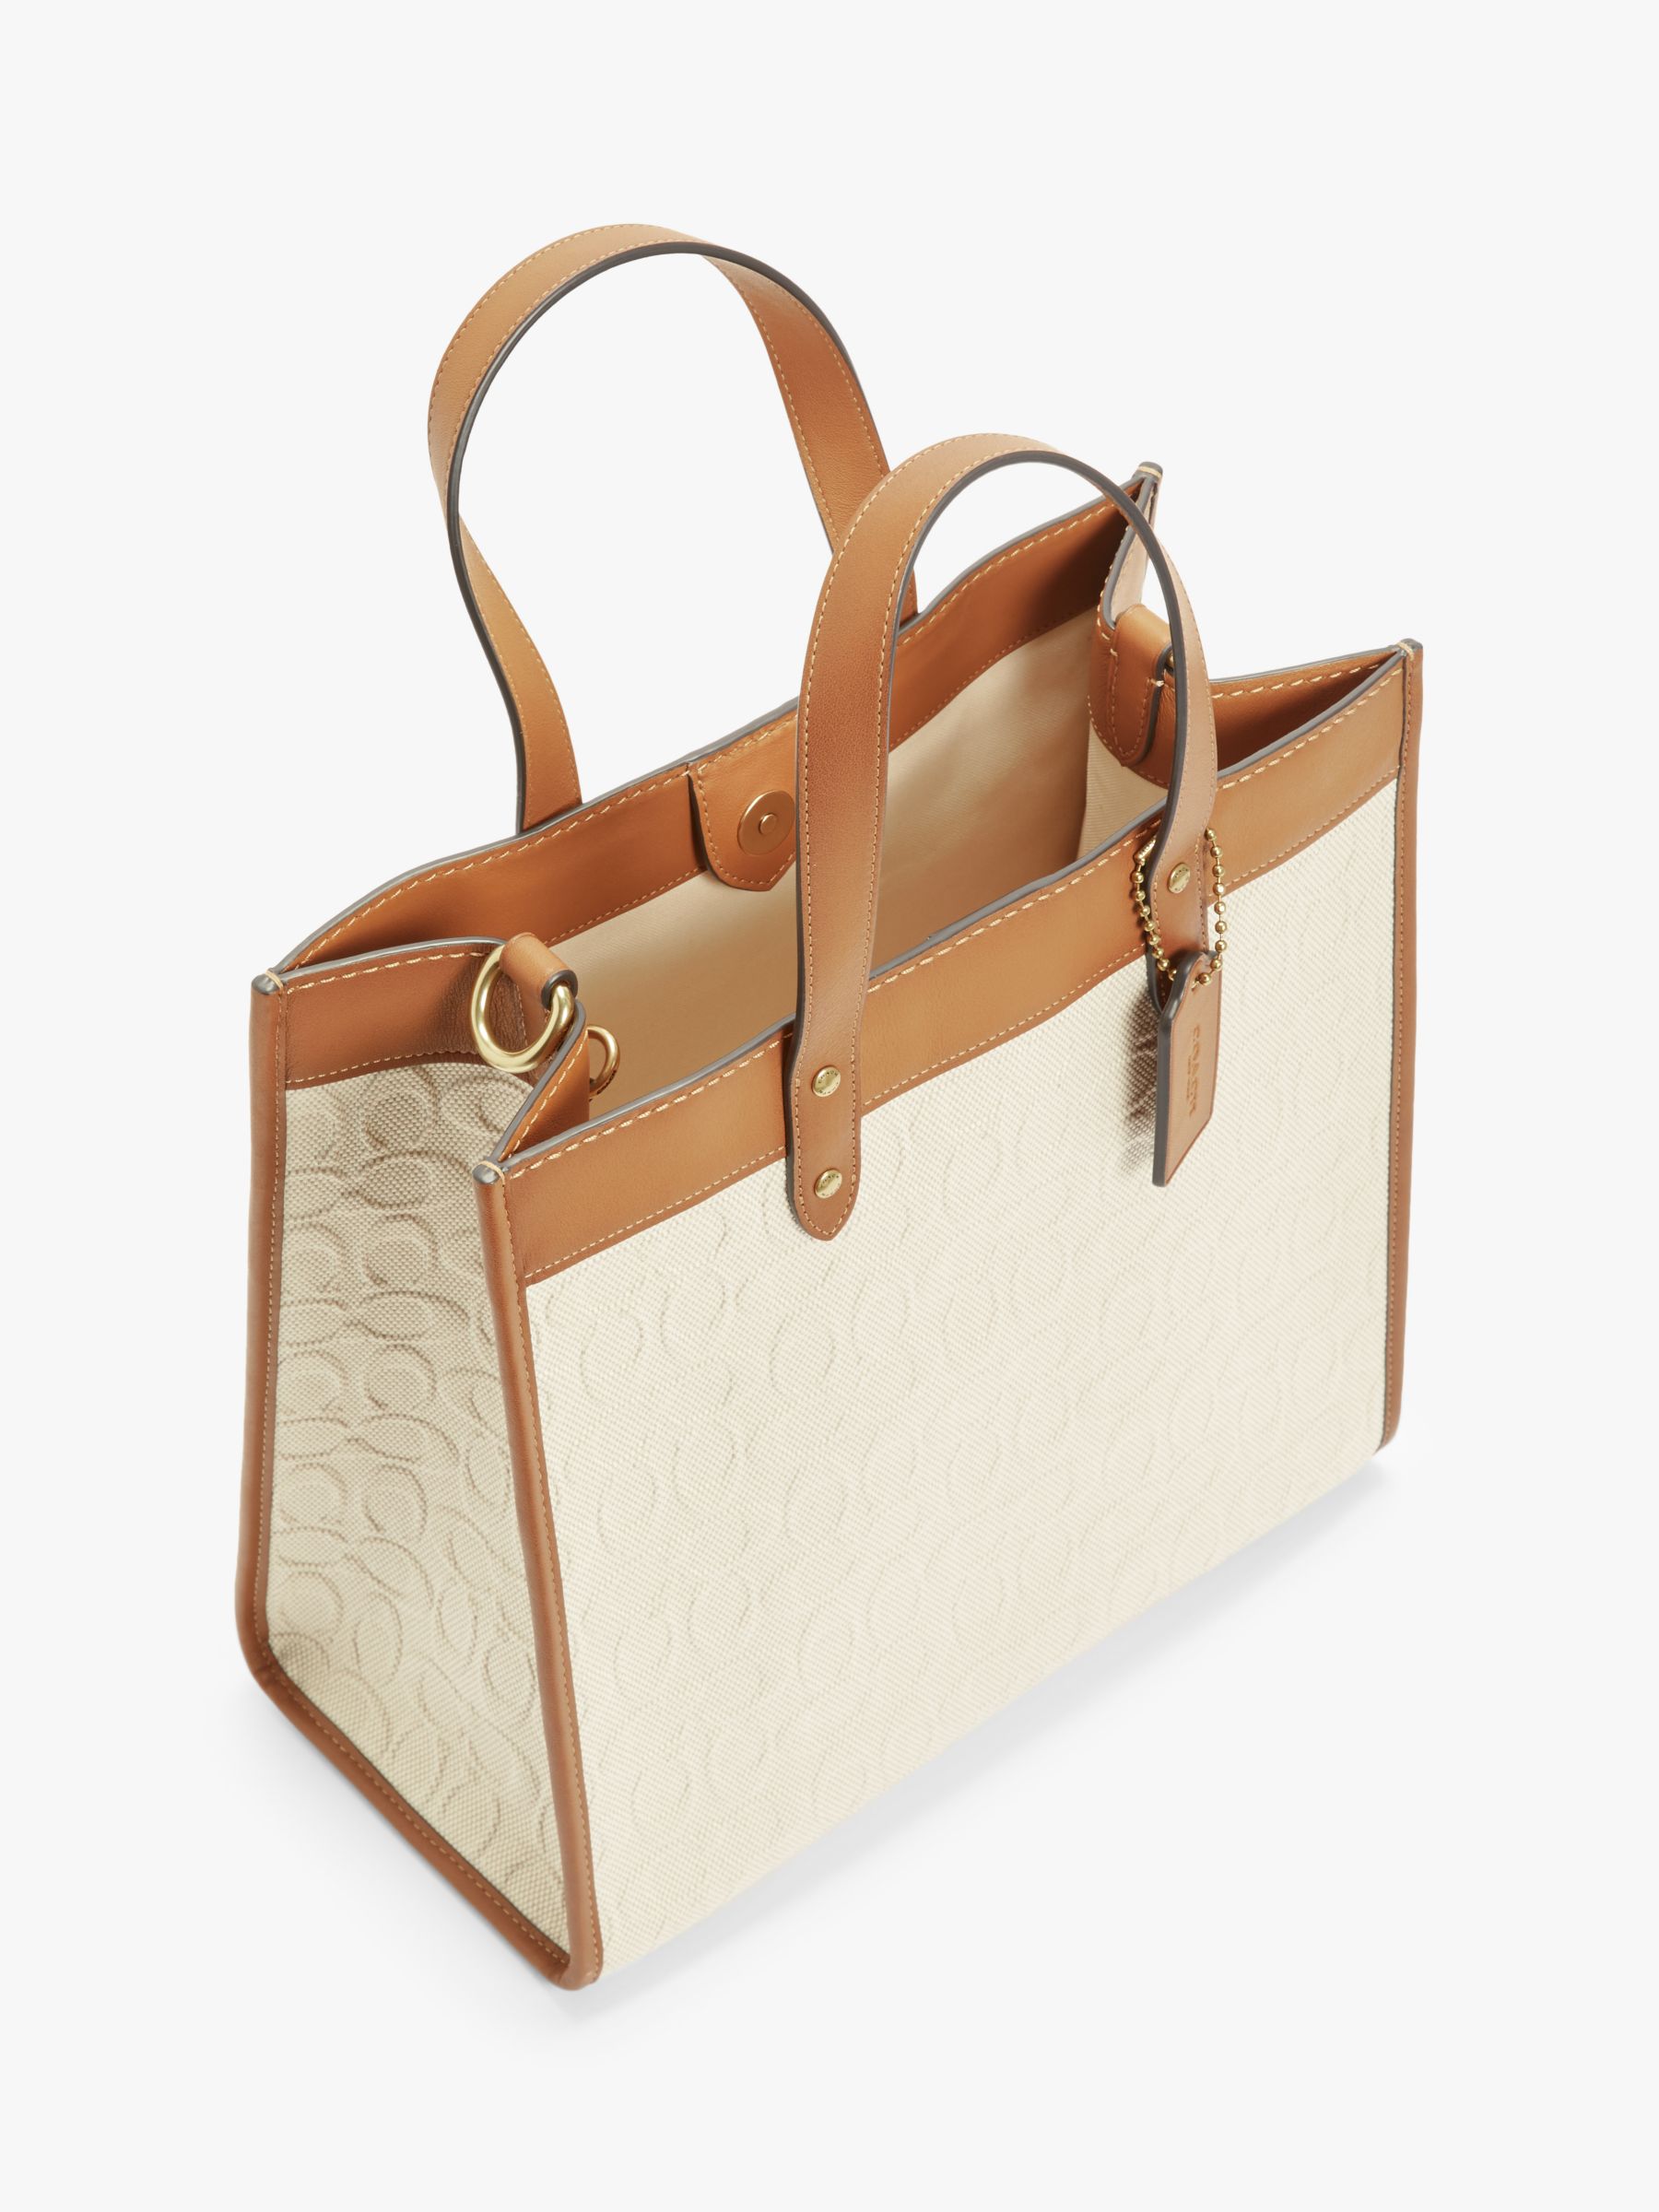 Coach Field Canvas Tote Bag, Saddle at John Lewis & Partners